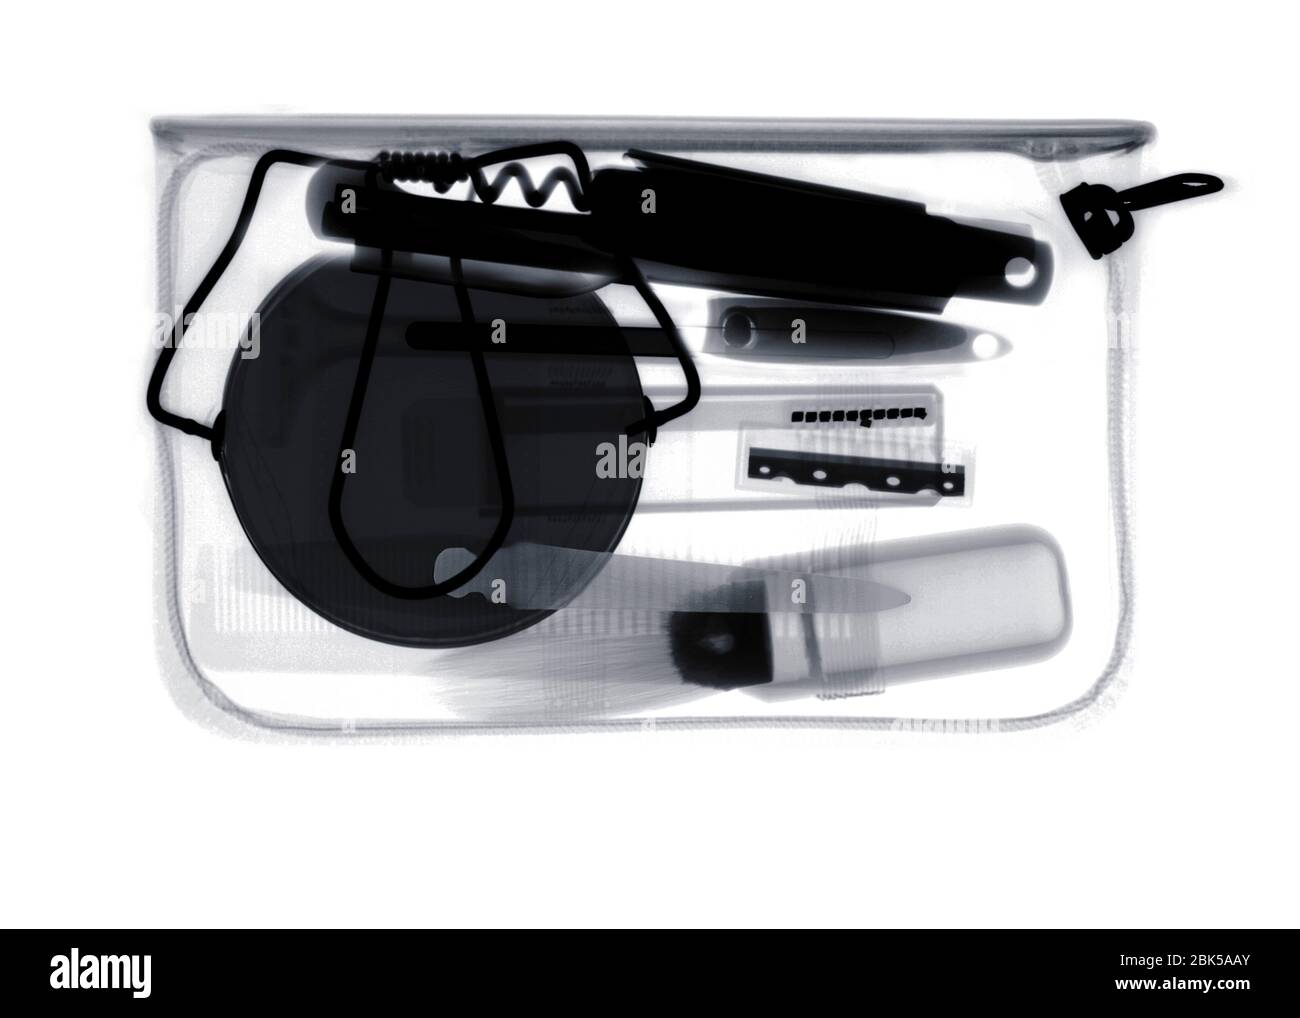 Male grooming kit, X-ray. Stock Photo